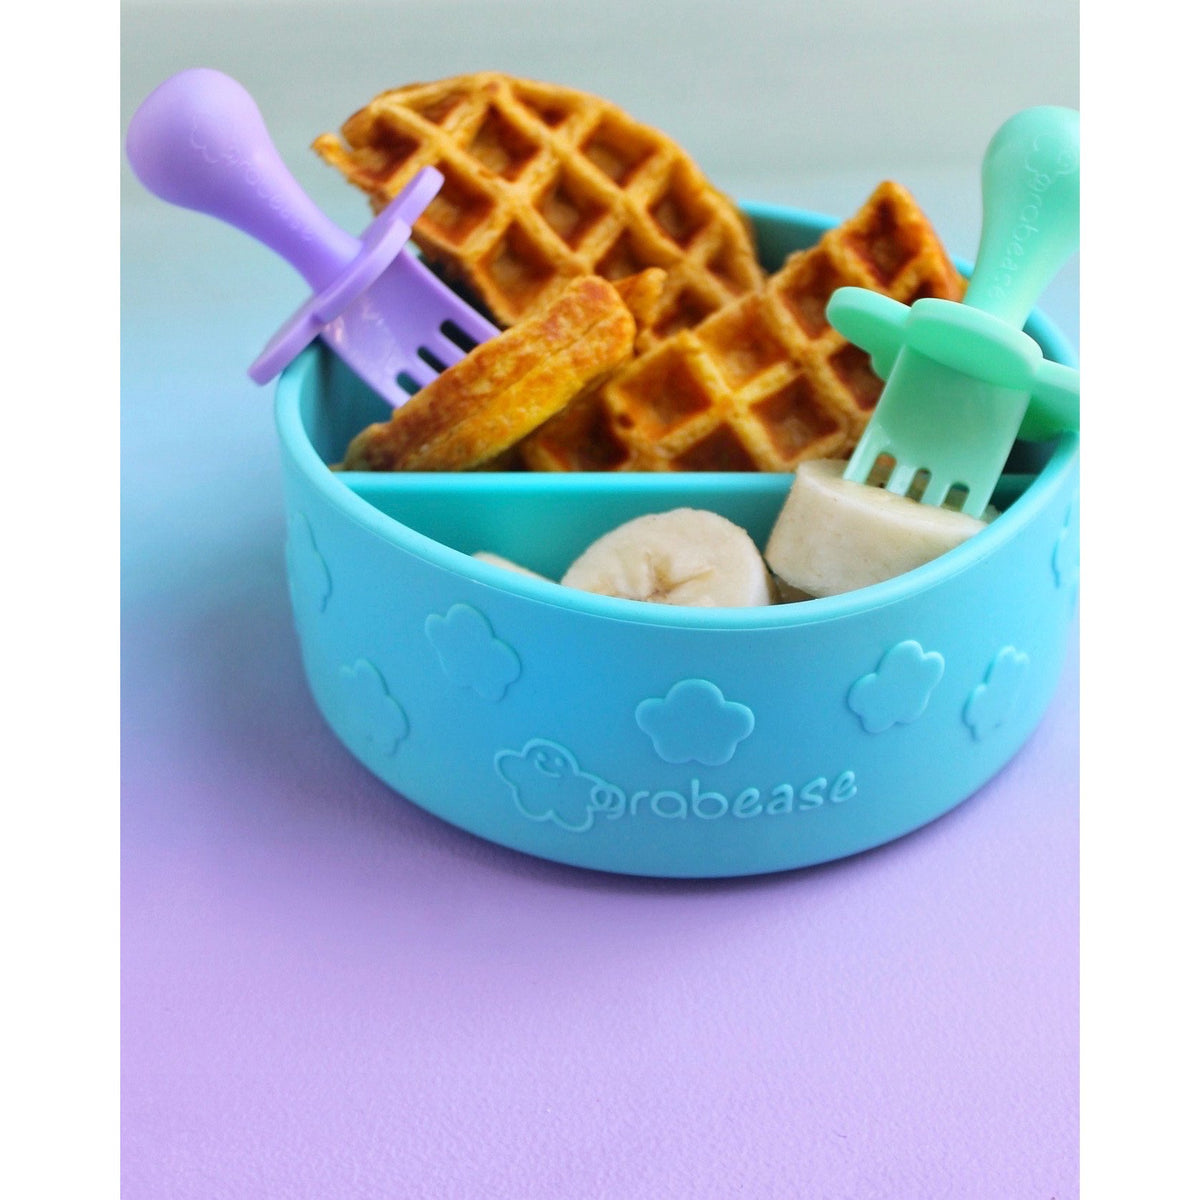 grabease-silicone-suction-bowl-teal- (8)